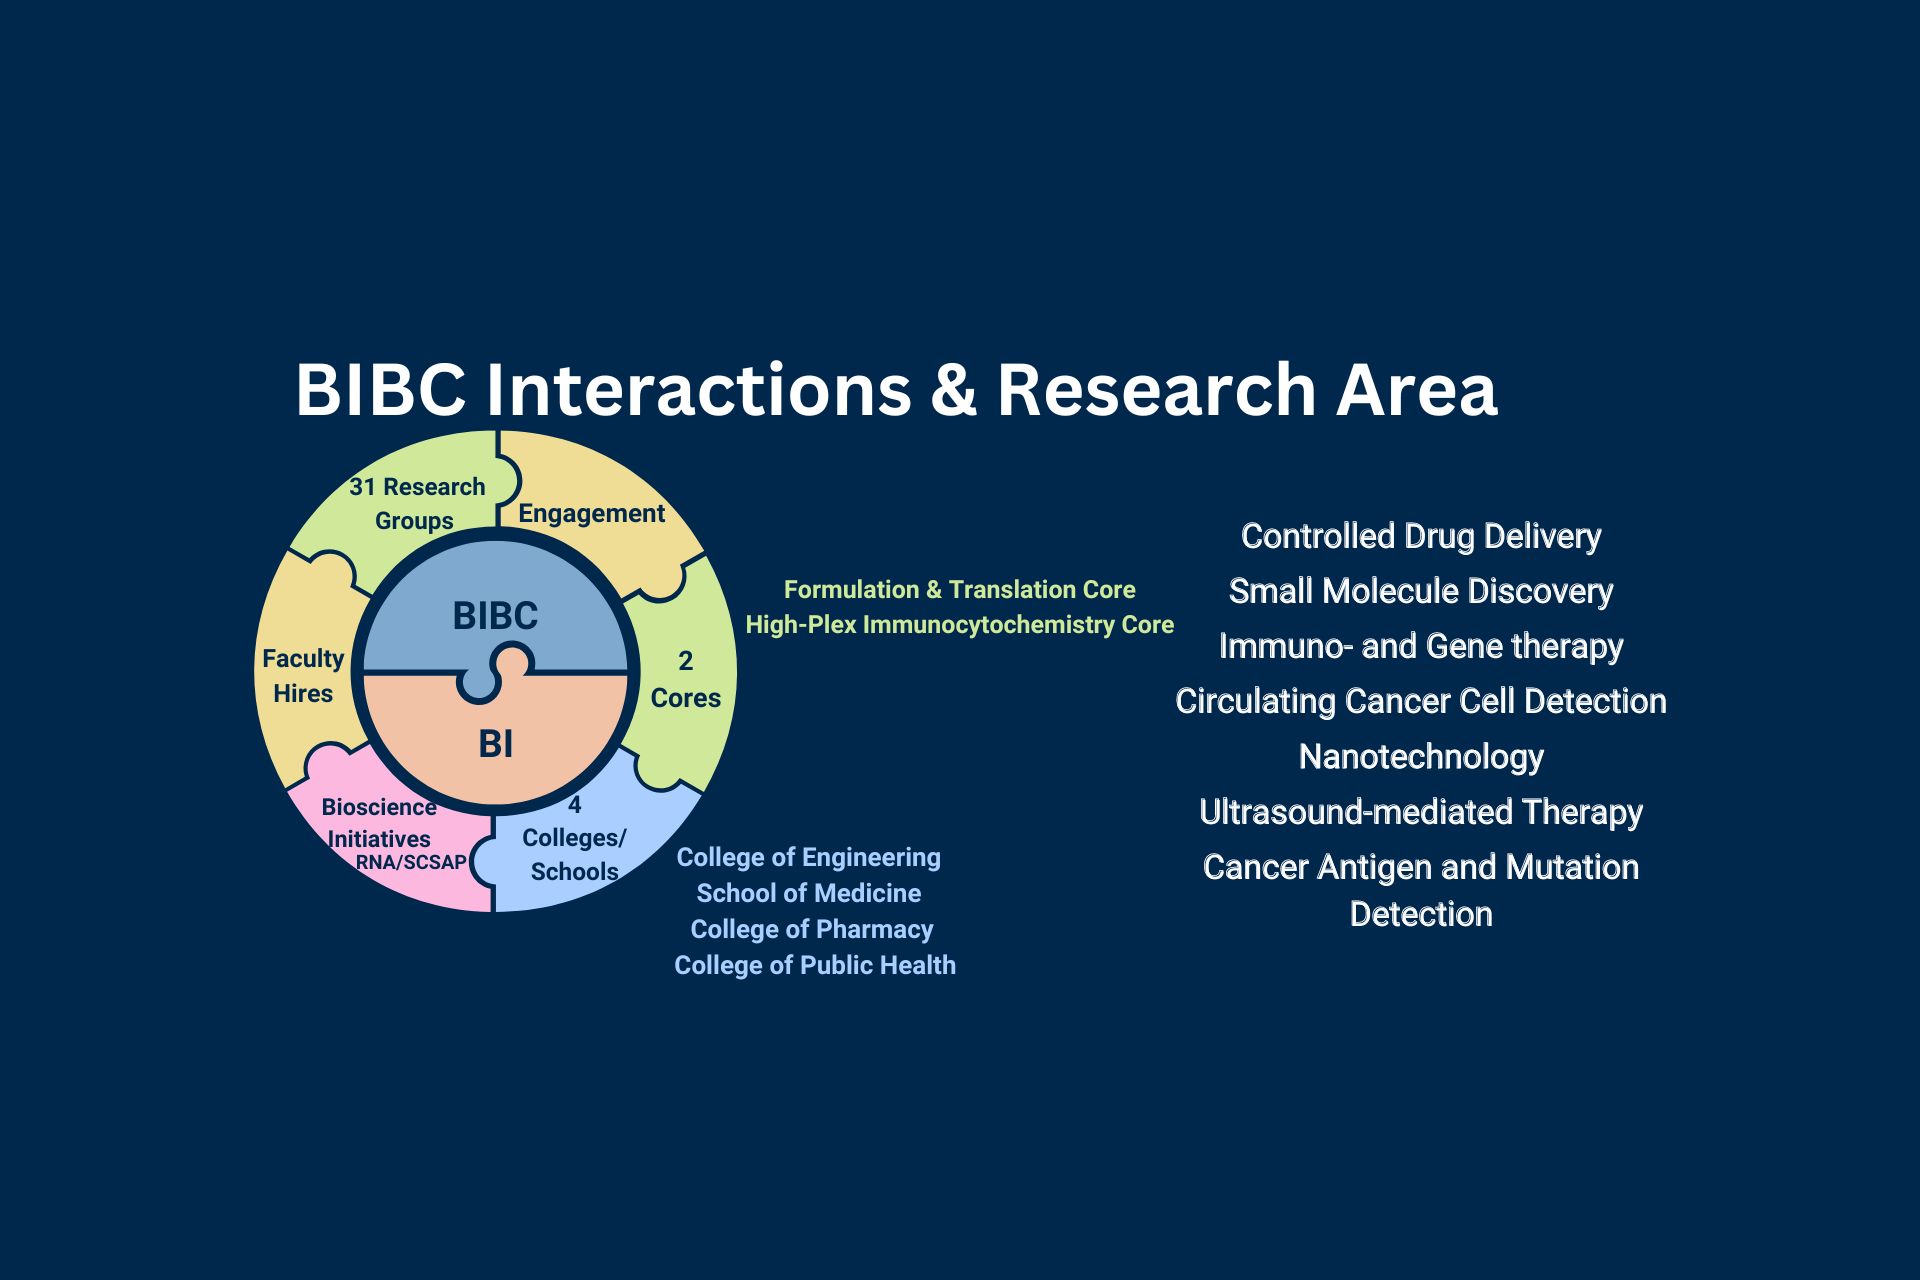 BIBC Interactions & Research Area Slide - updated from previous to include High-Plex Core